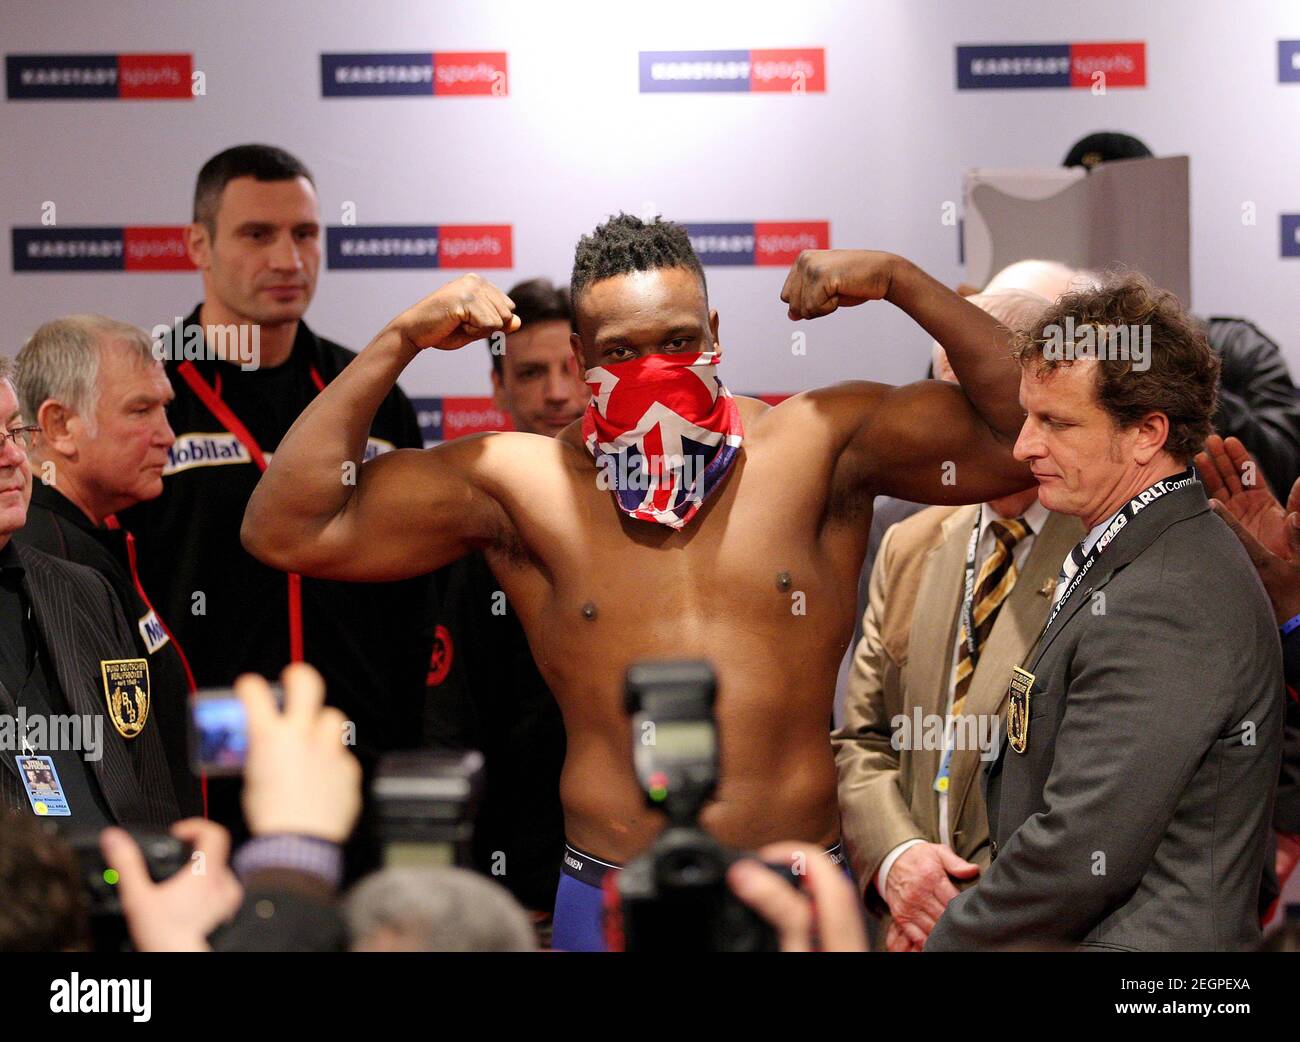 Boxing - Vitali Klitschko & Dereck Chisora Weigh-In - Karstadt sports  Oberpollinger, Munich, Germany - 17/2/12 Dereck Chisora during the weigh in  Mandatory Credit: Action Images / Andrew Couldridge Livepic Stock Photo -  Alamy